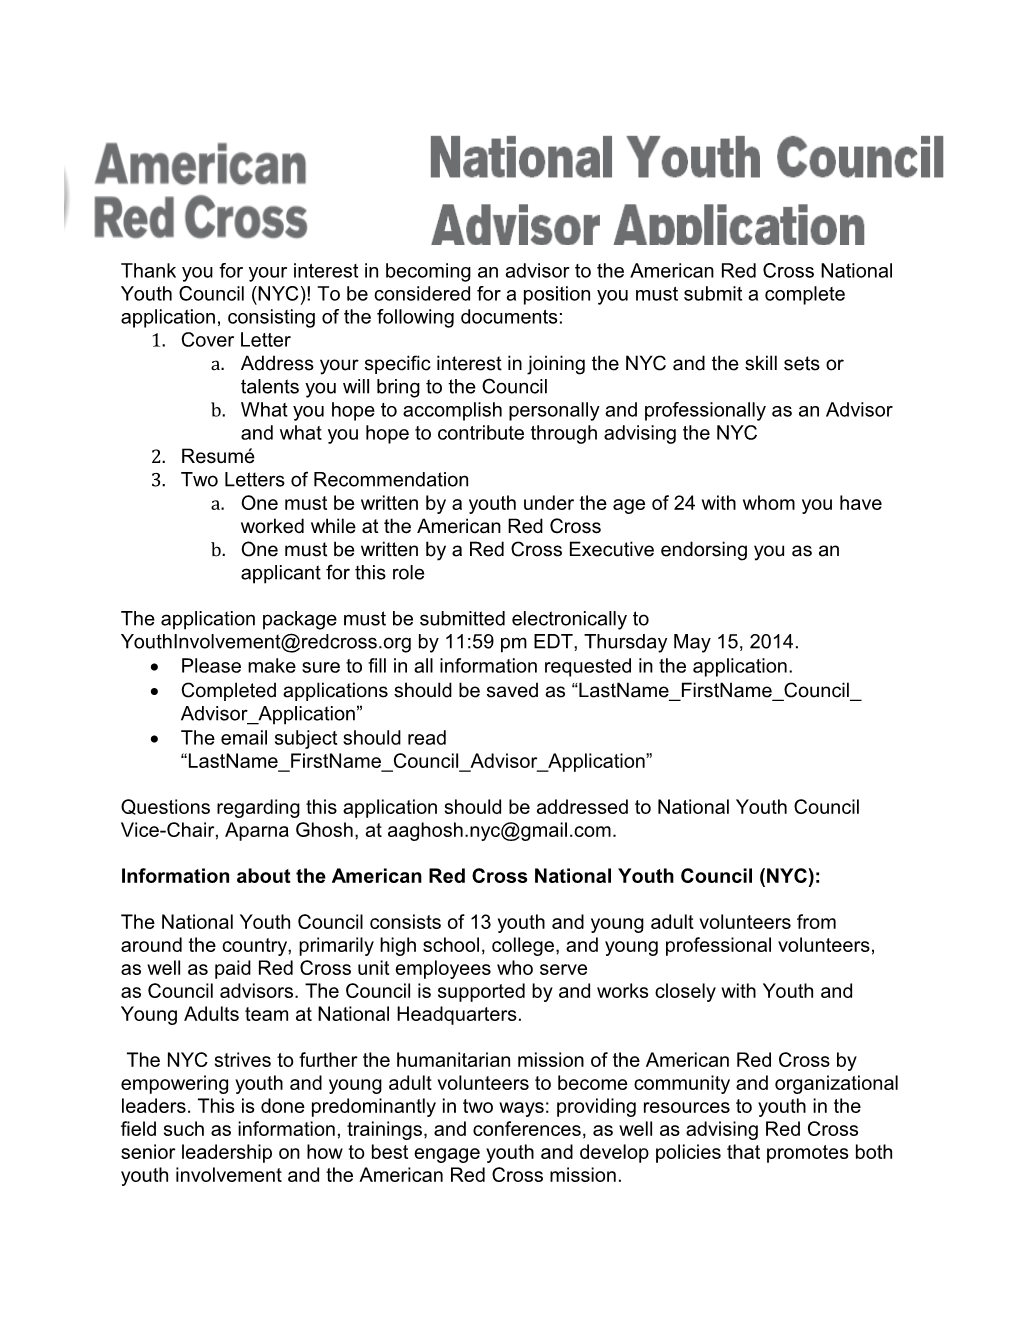 Thank You for Your Interest in Becoming an Advisor to the American Red Cross National